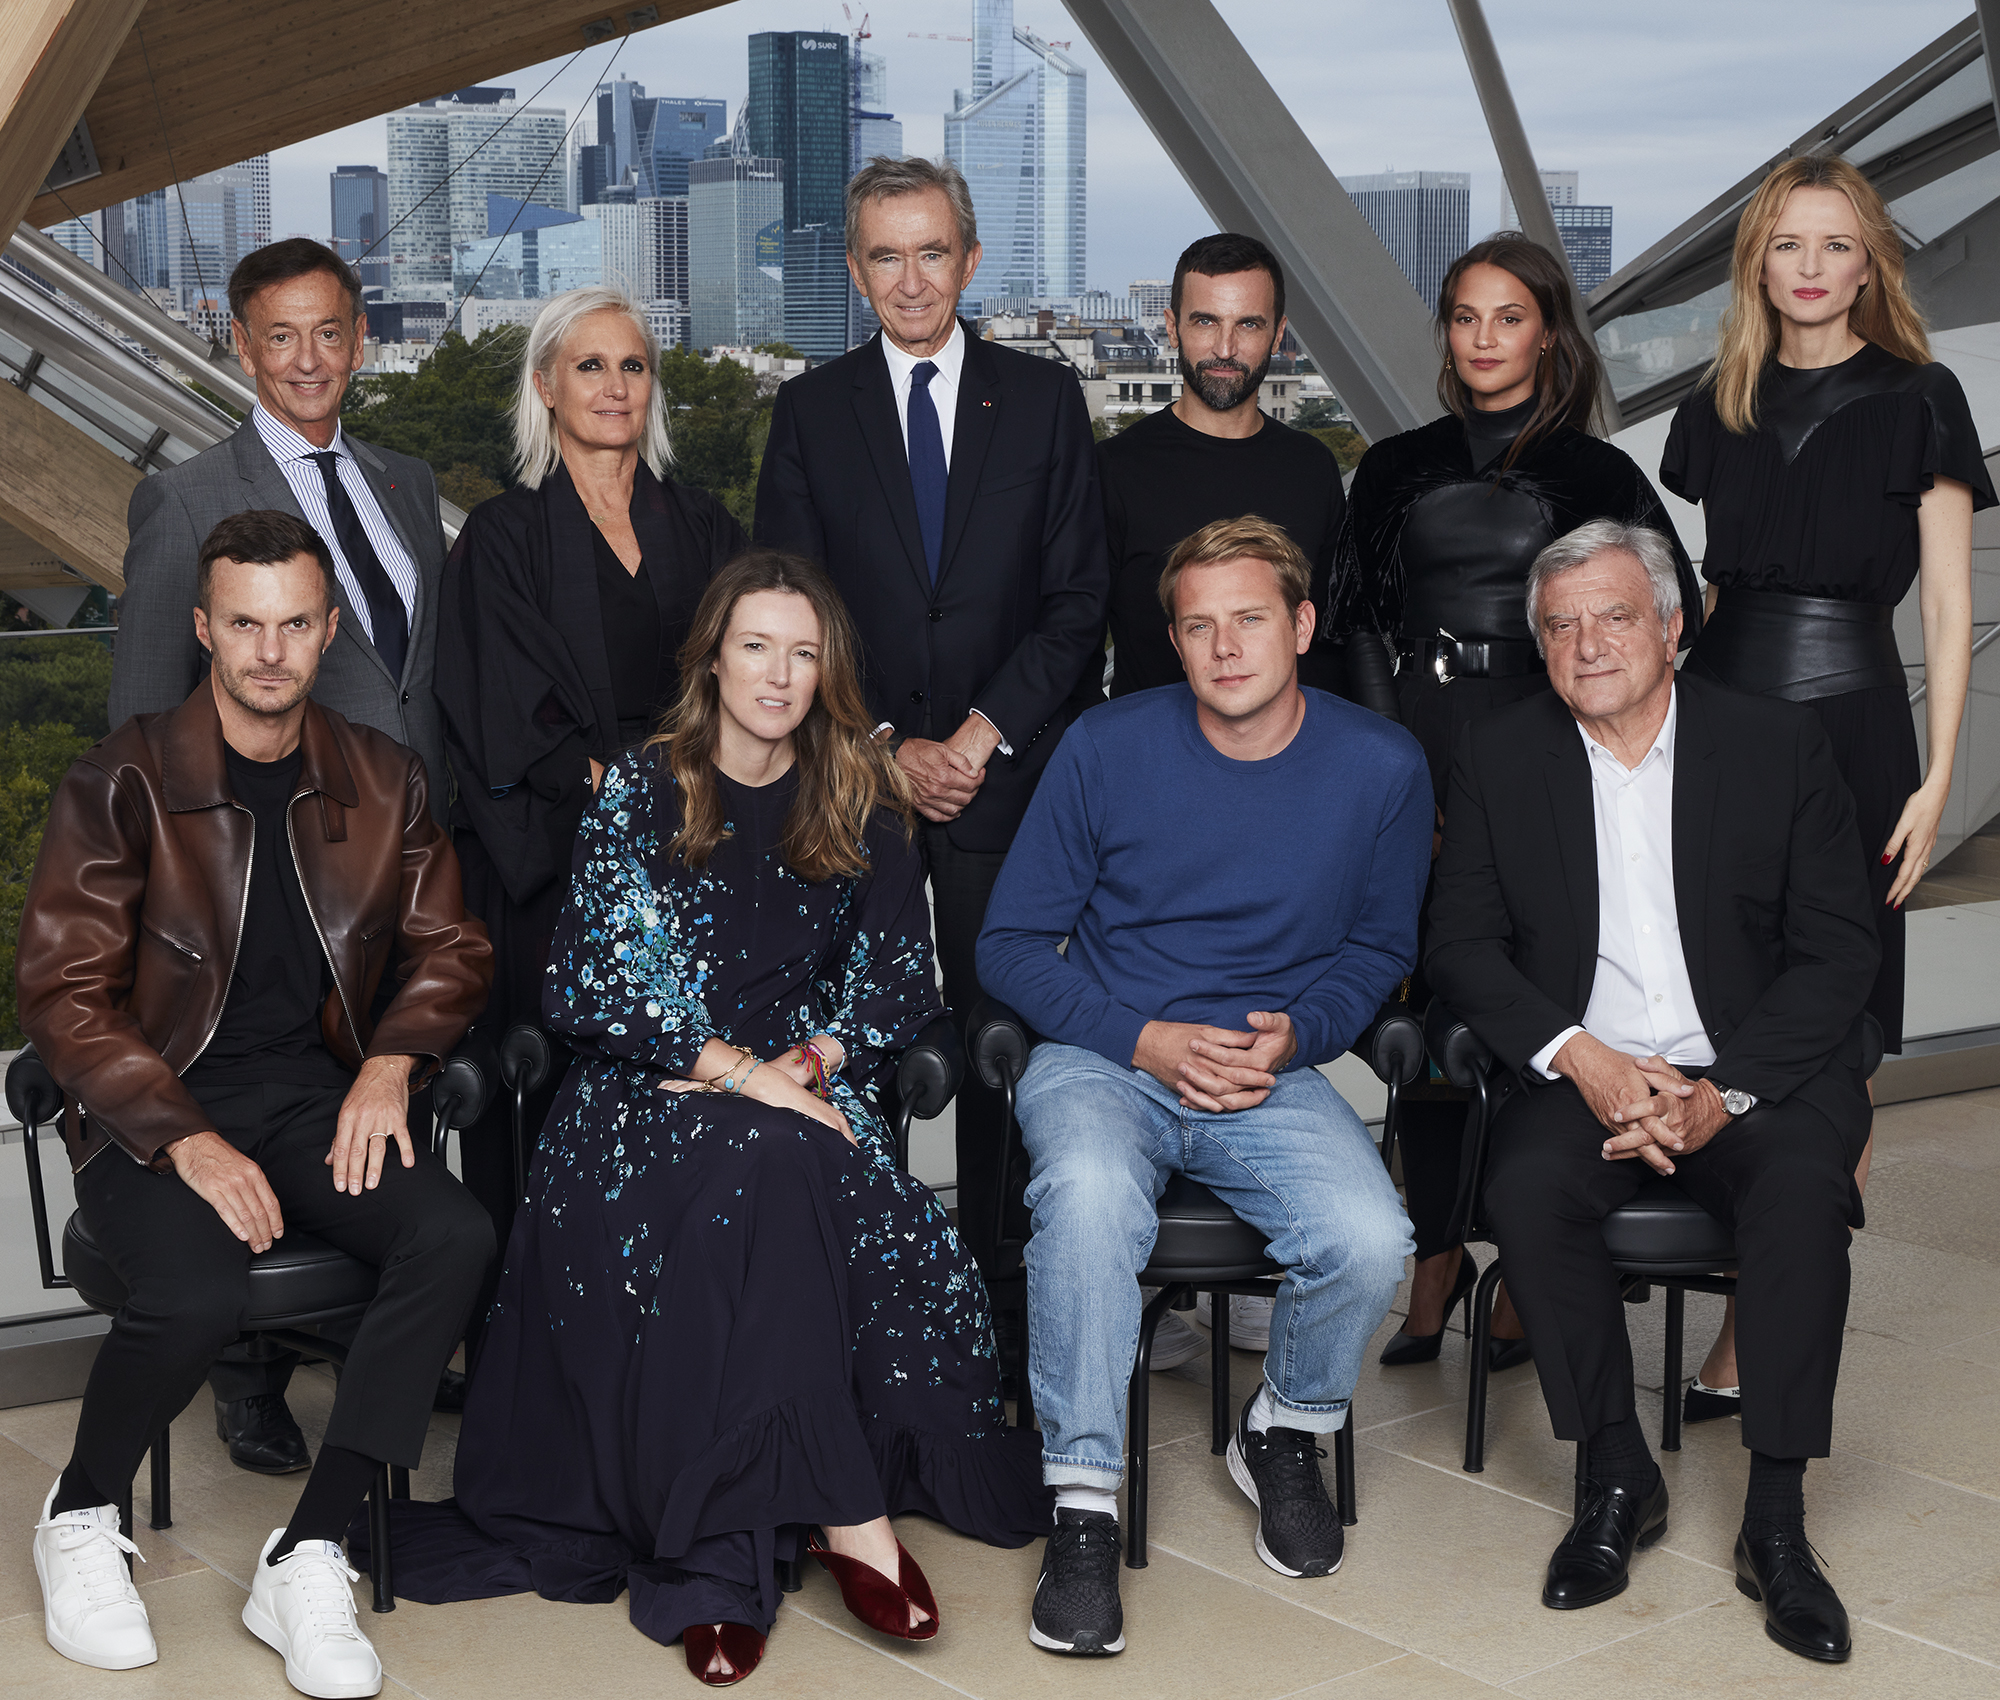 The Winners of the tenth edition of the LVMH Prize for Young